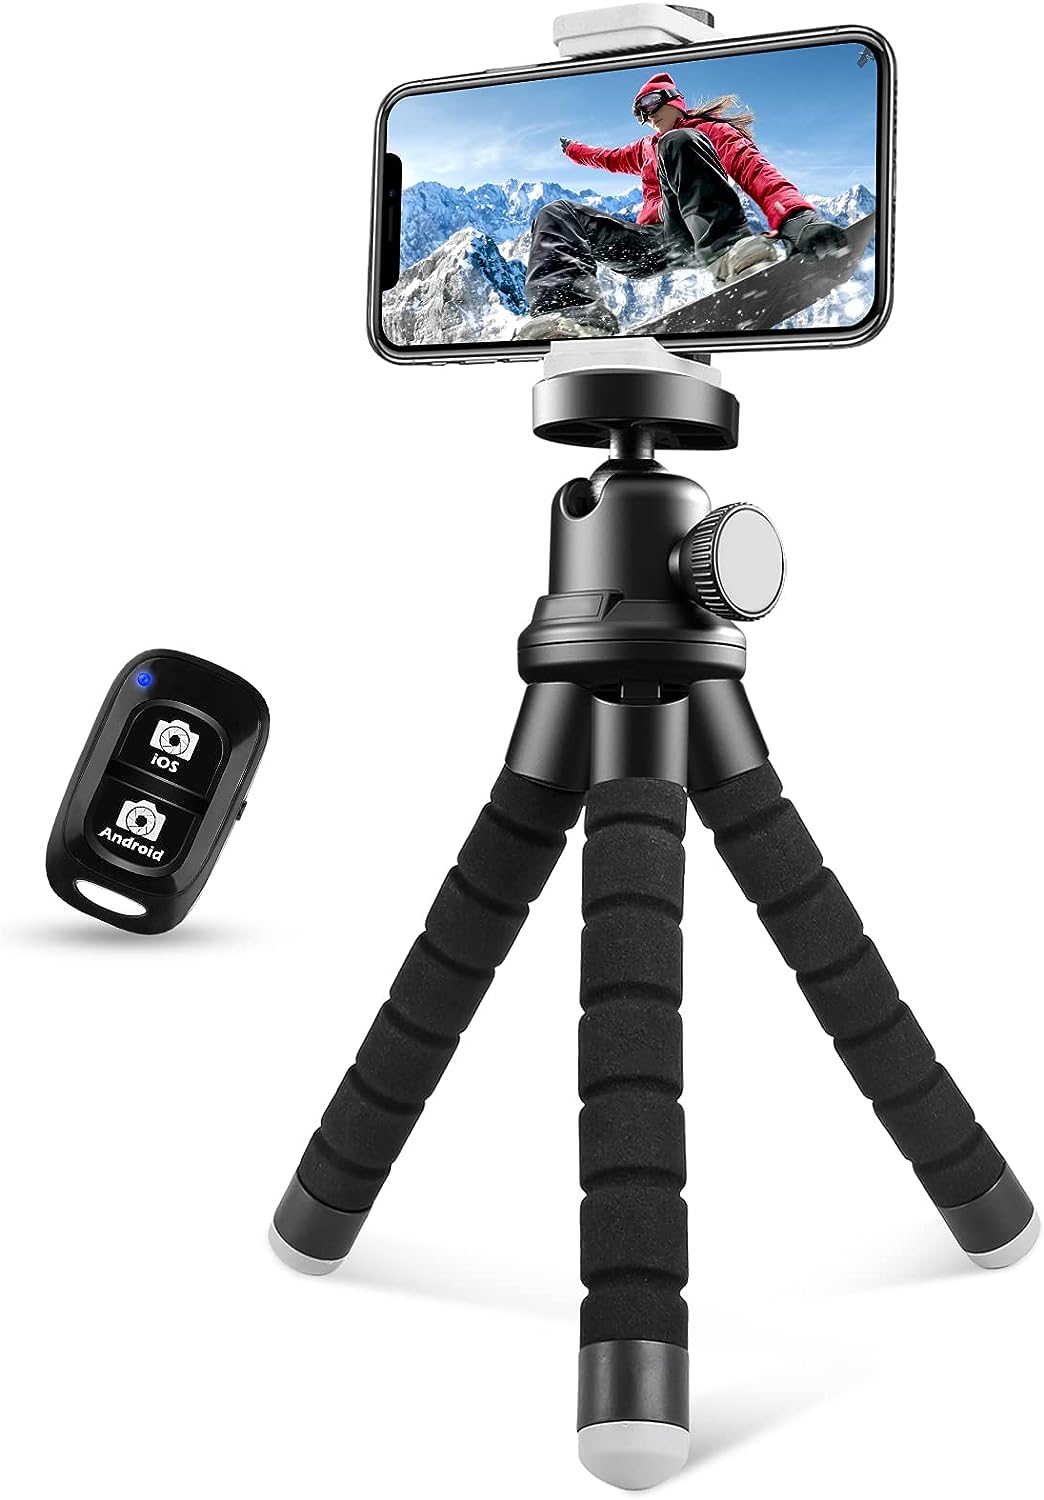 Phone Tripod, Flexible Cell Phone Tripod with Phone Holder and Wireless Remote, Mini Travel Tripod Stand, Compatible with All Cell Phones, Cameras